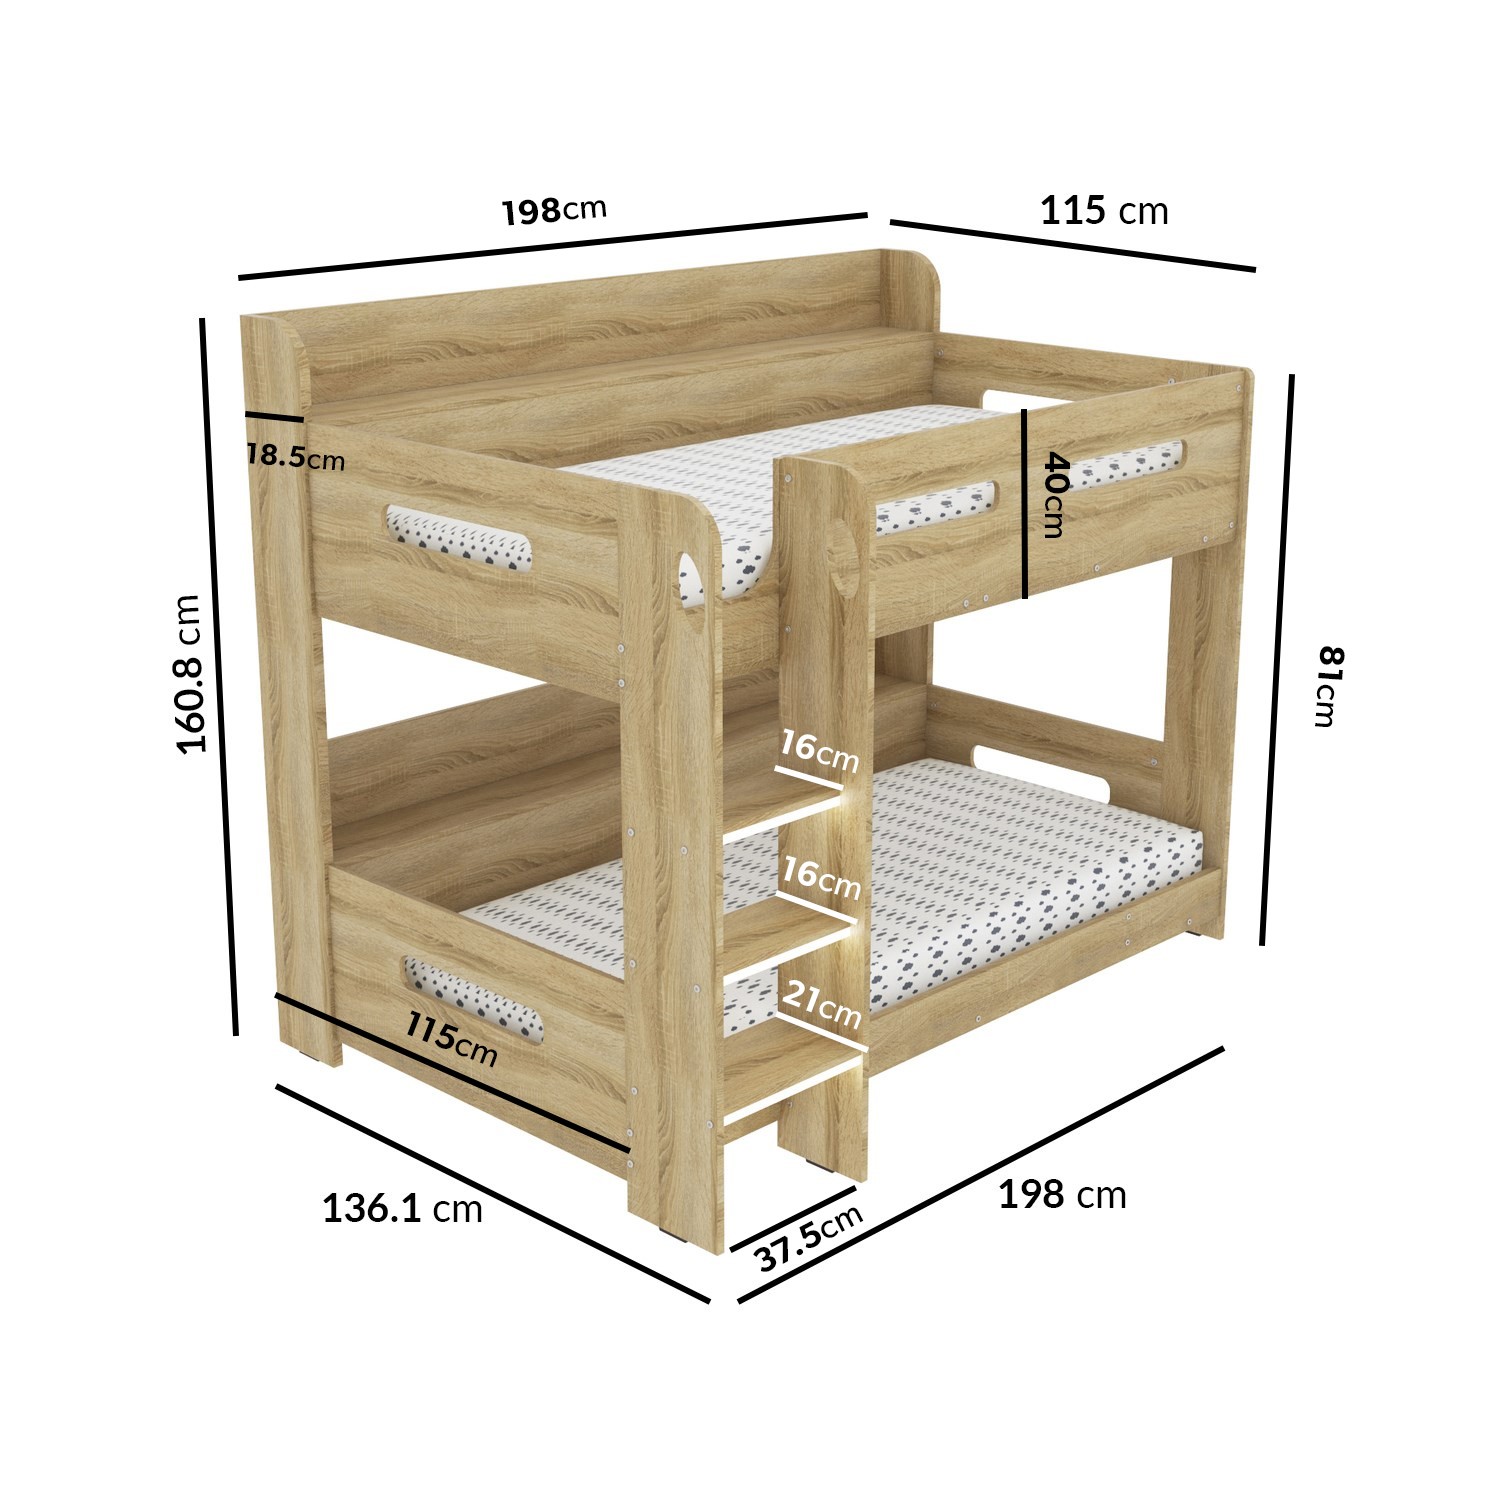 Read more about Oak bunk bed with shelves sky